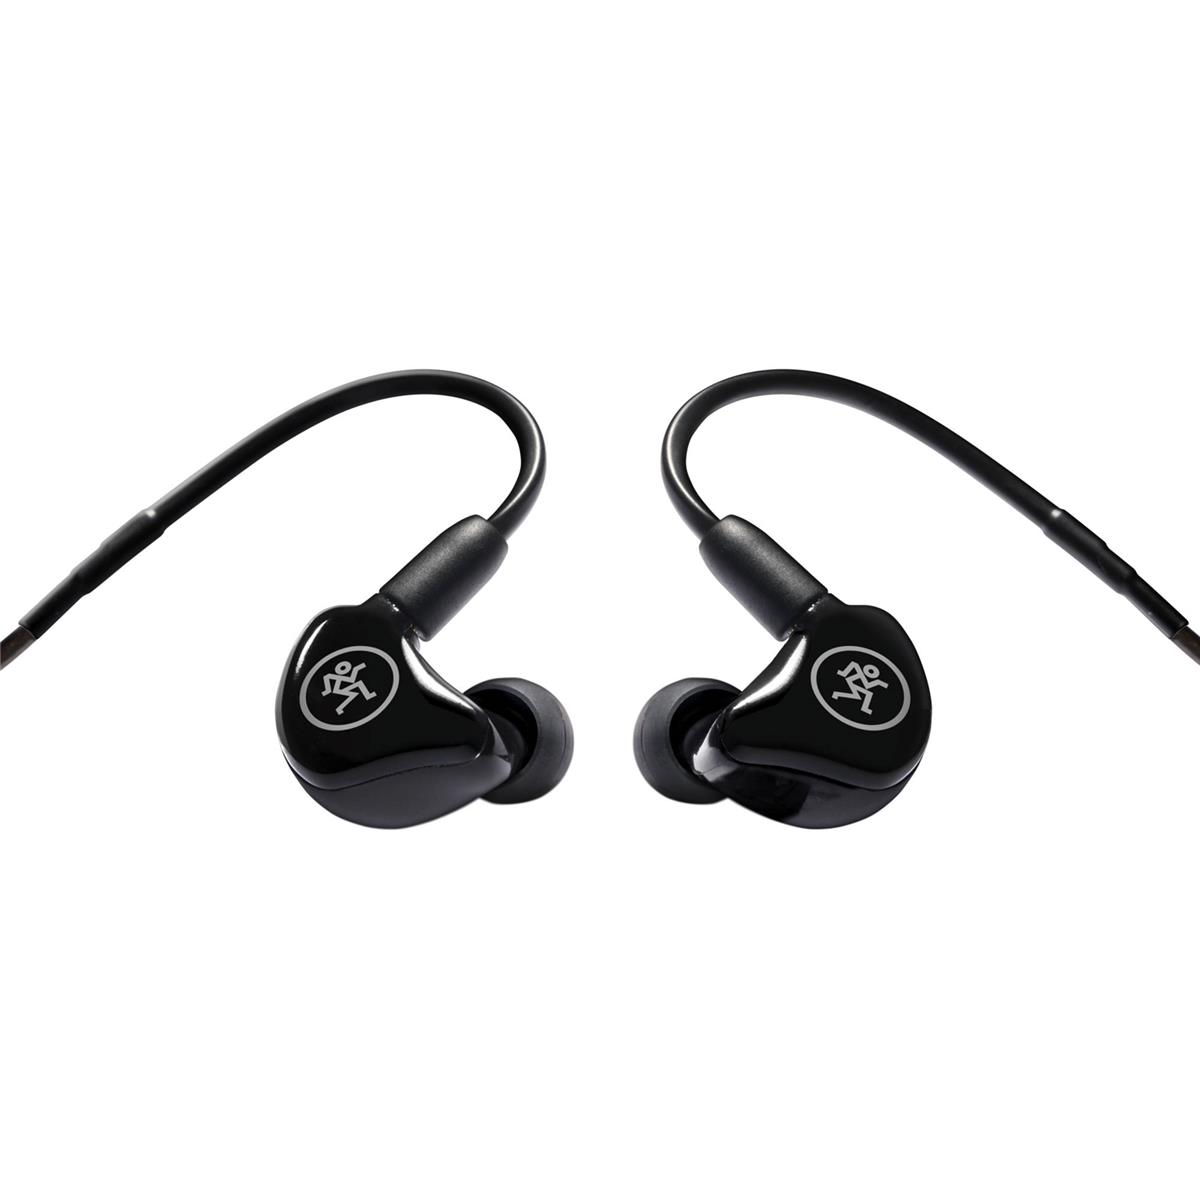 Image of Mackie MP-120 Single Dynamic Driver Professional In-Ear Monitors